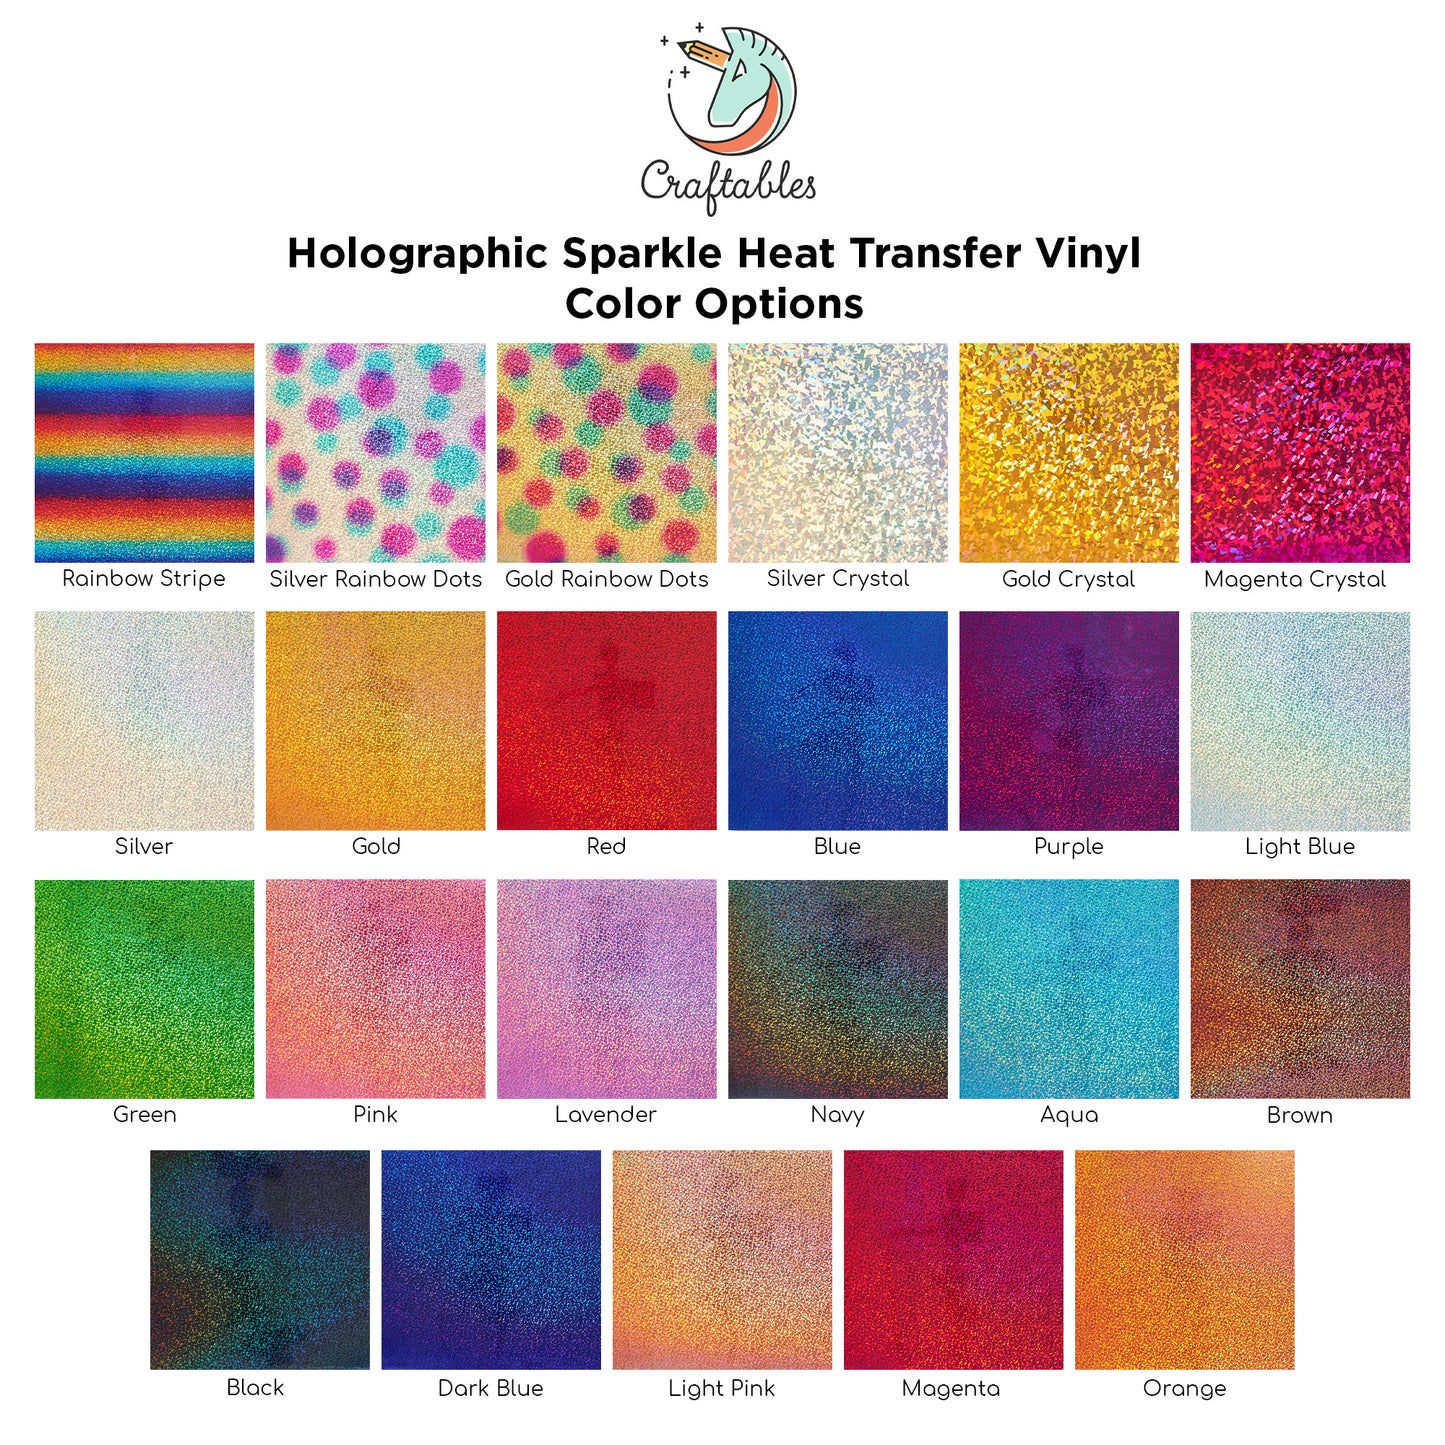 Green Holographic Sparkle Heat Transfer Vinyl Rolls By Craftables